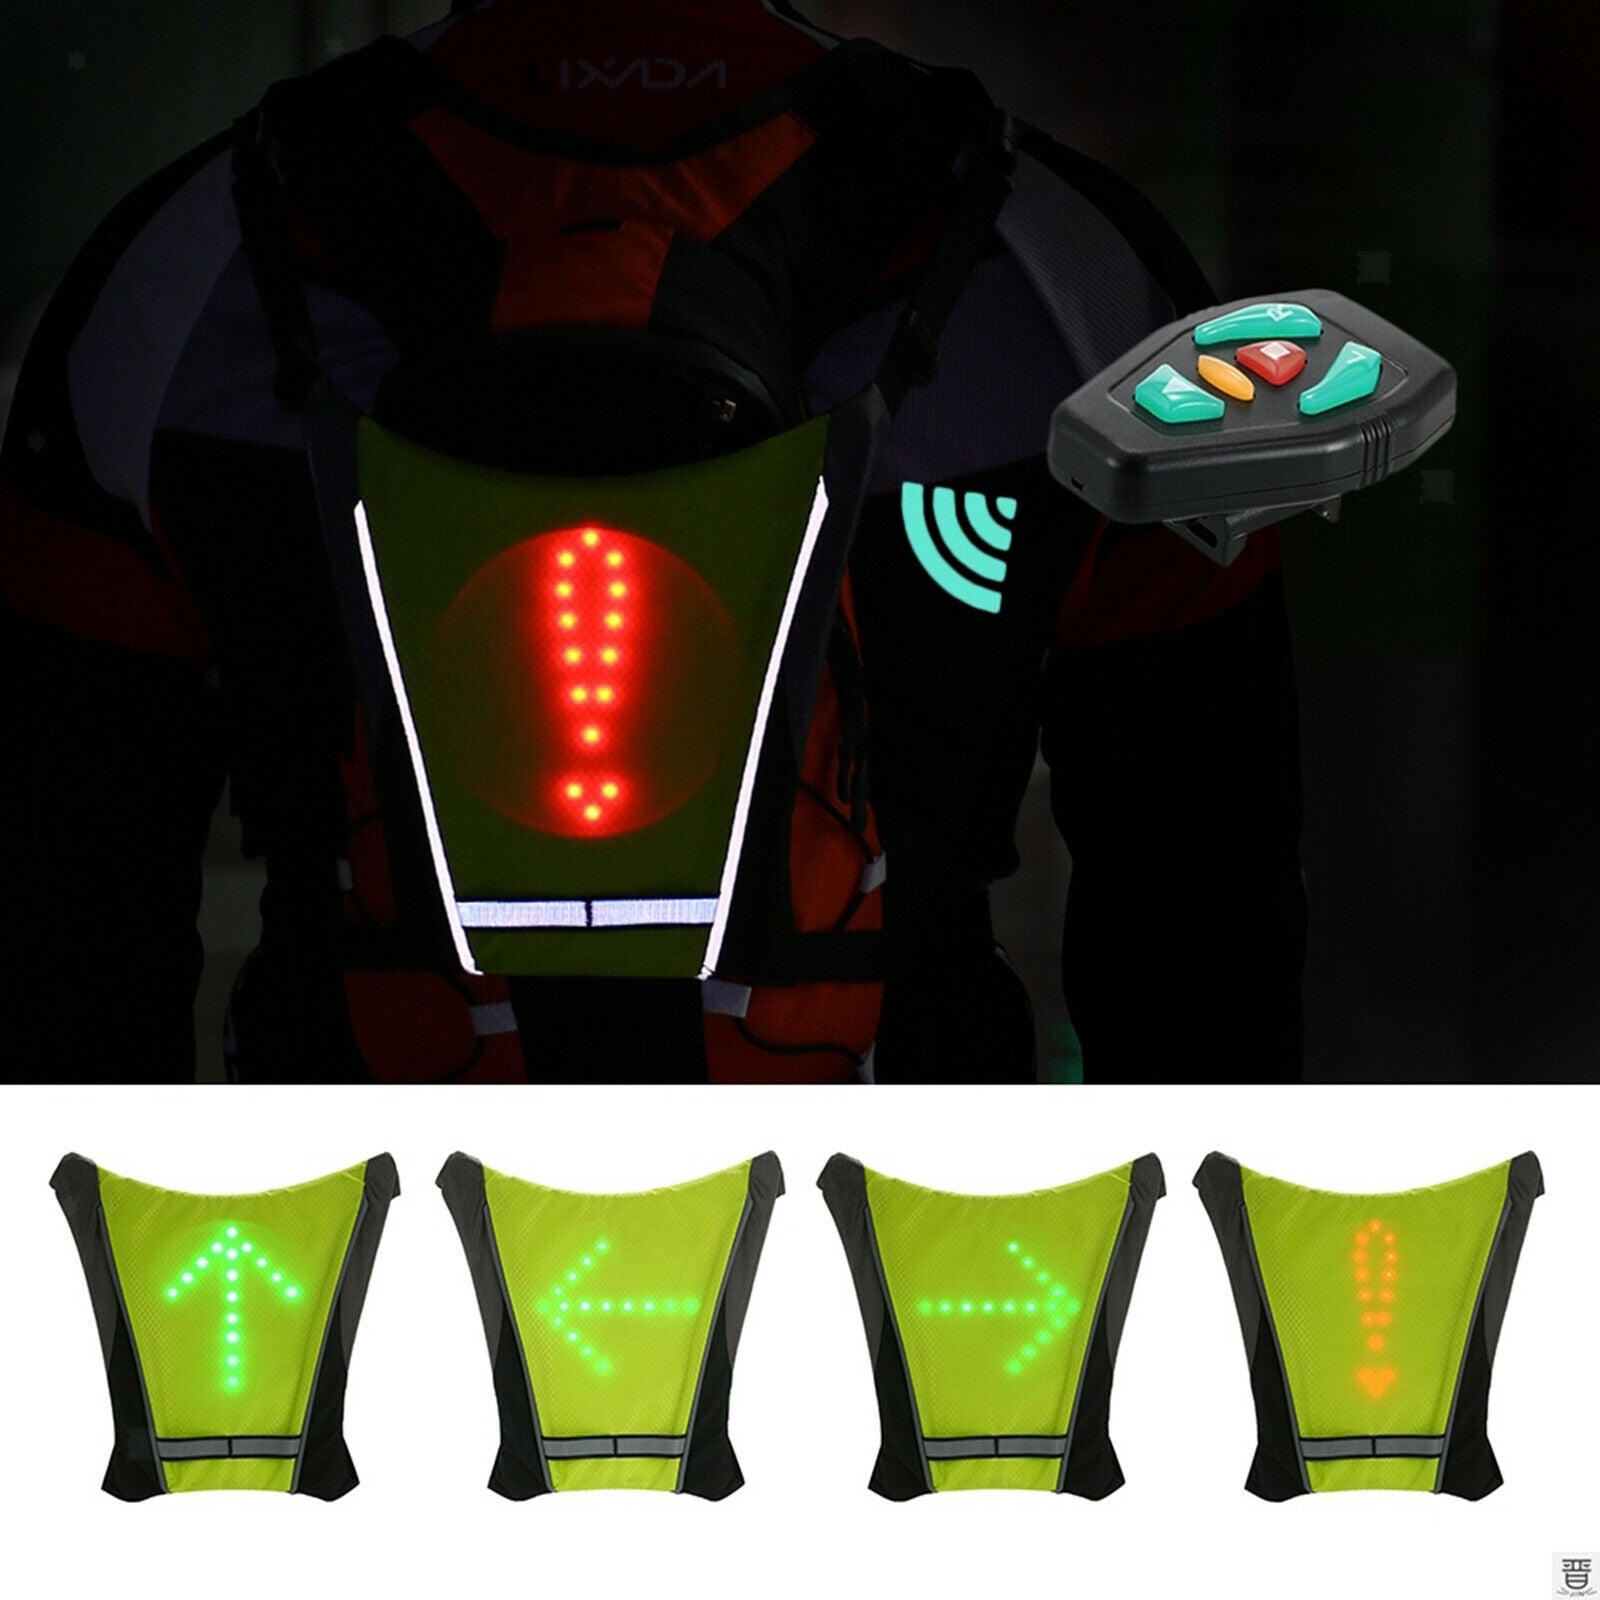 Cycling Turn Signal Pack Direction Indicator High Visible Outdoor Bike Guid Vest